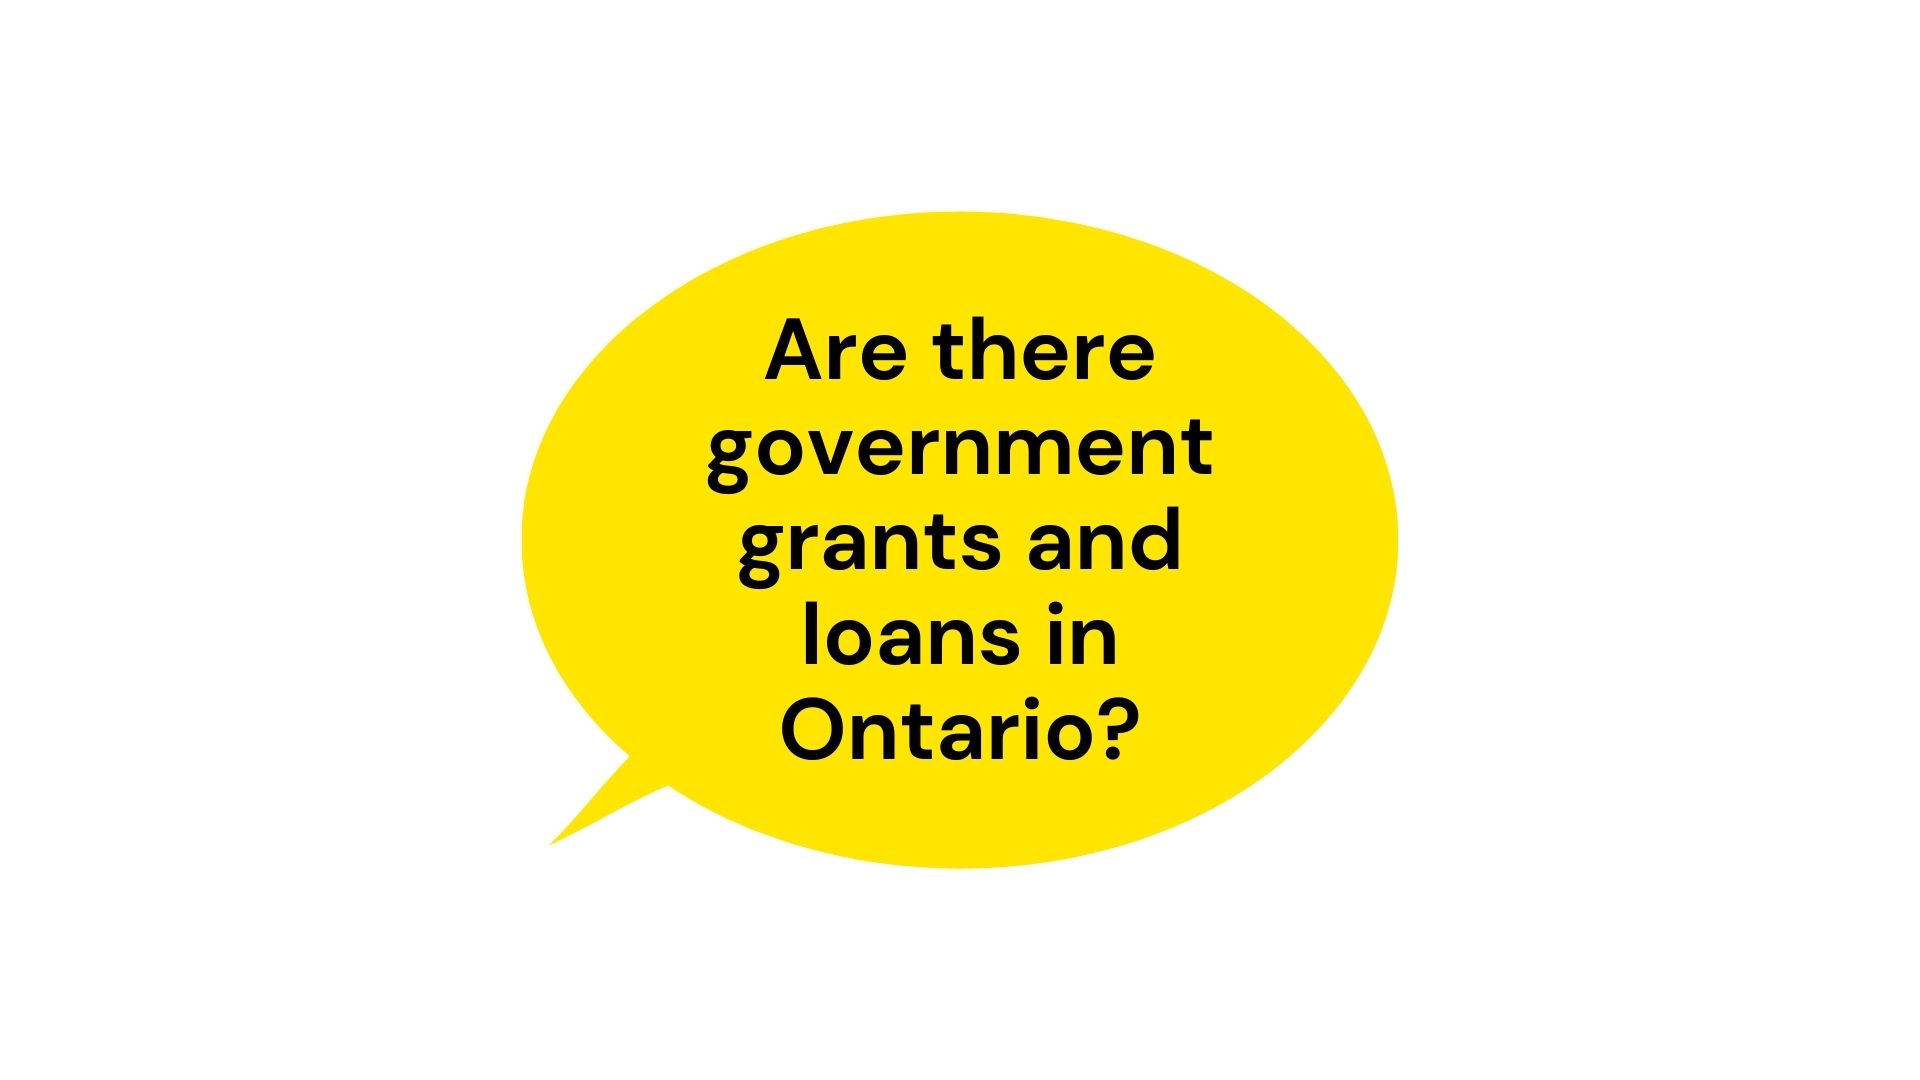 Are there government grants and loans in Ontario